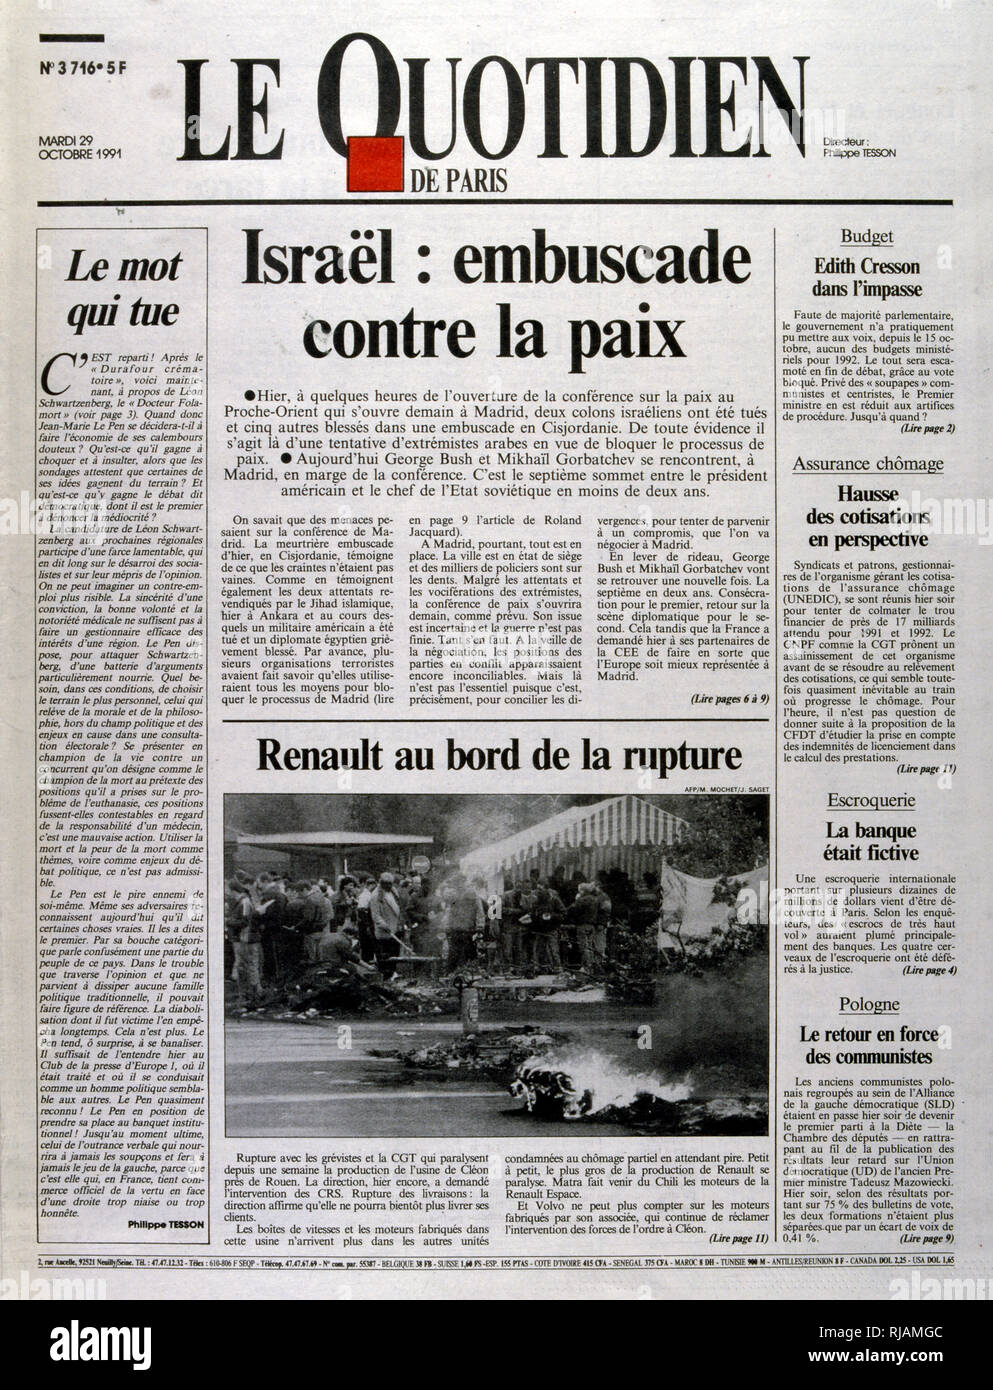 hours before the opening of the Middle East peace conference in Madrid, two Israeli settlers were killed and five others wounded in an ambush in the West Bank. Front Page of the French publication 'Le Quotidien' reporting on the Madrid Conference;  a peace conference, held from 30 October to 1 November 1991 in Madrid, hosted by Spain and co-sponsored by the United States and the Soviet Union. It was an attempt by the international community to revive the Israeli-Palestinian peace process through negotiations, involving Israel and the Palestinians as well as Arab countries, including Jordan, Le Stock Photo